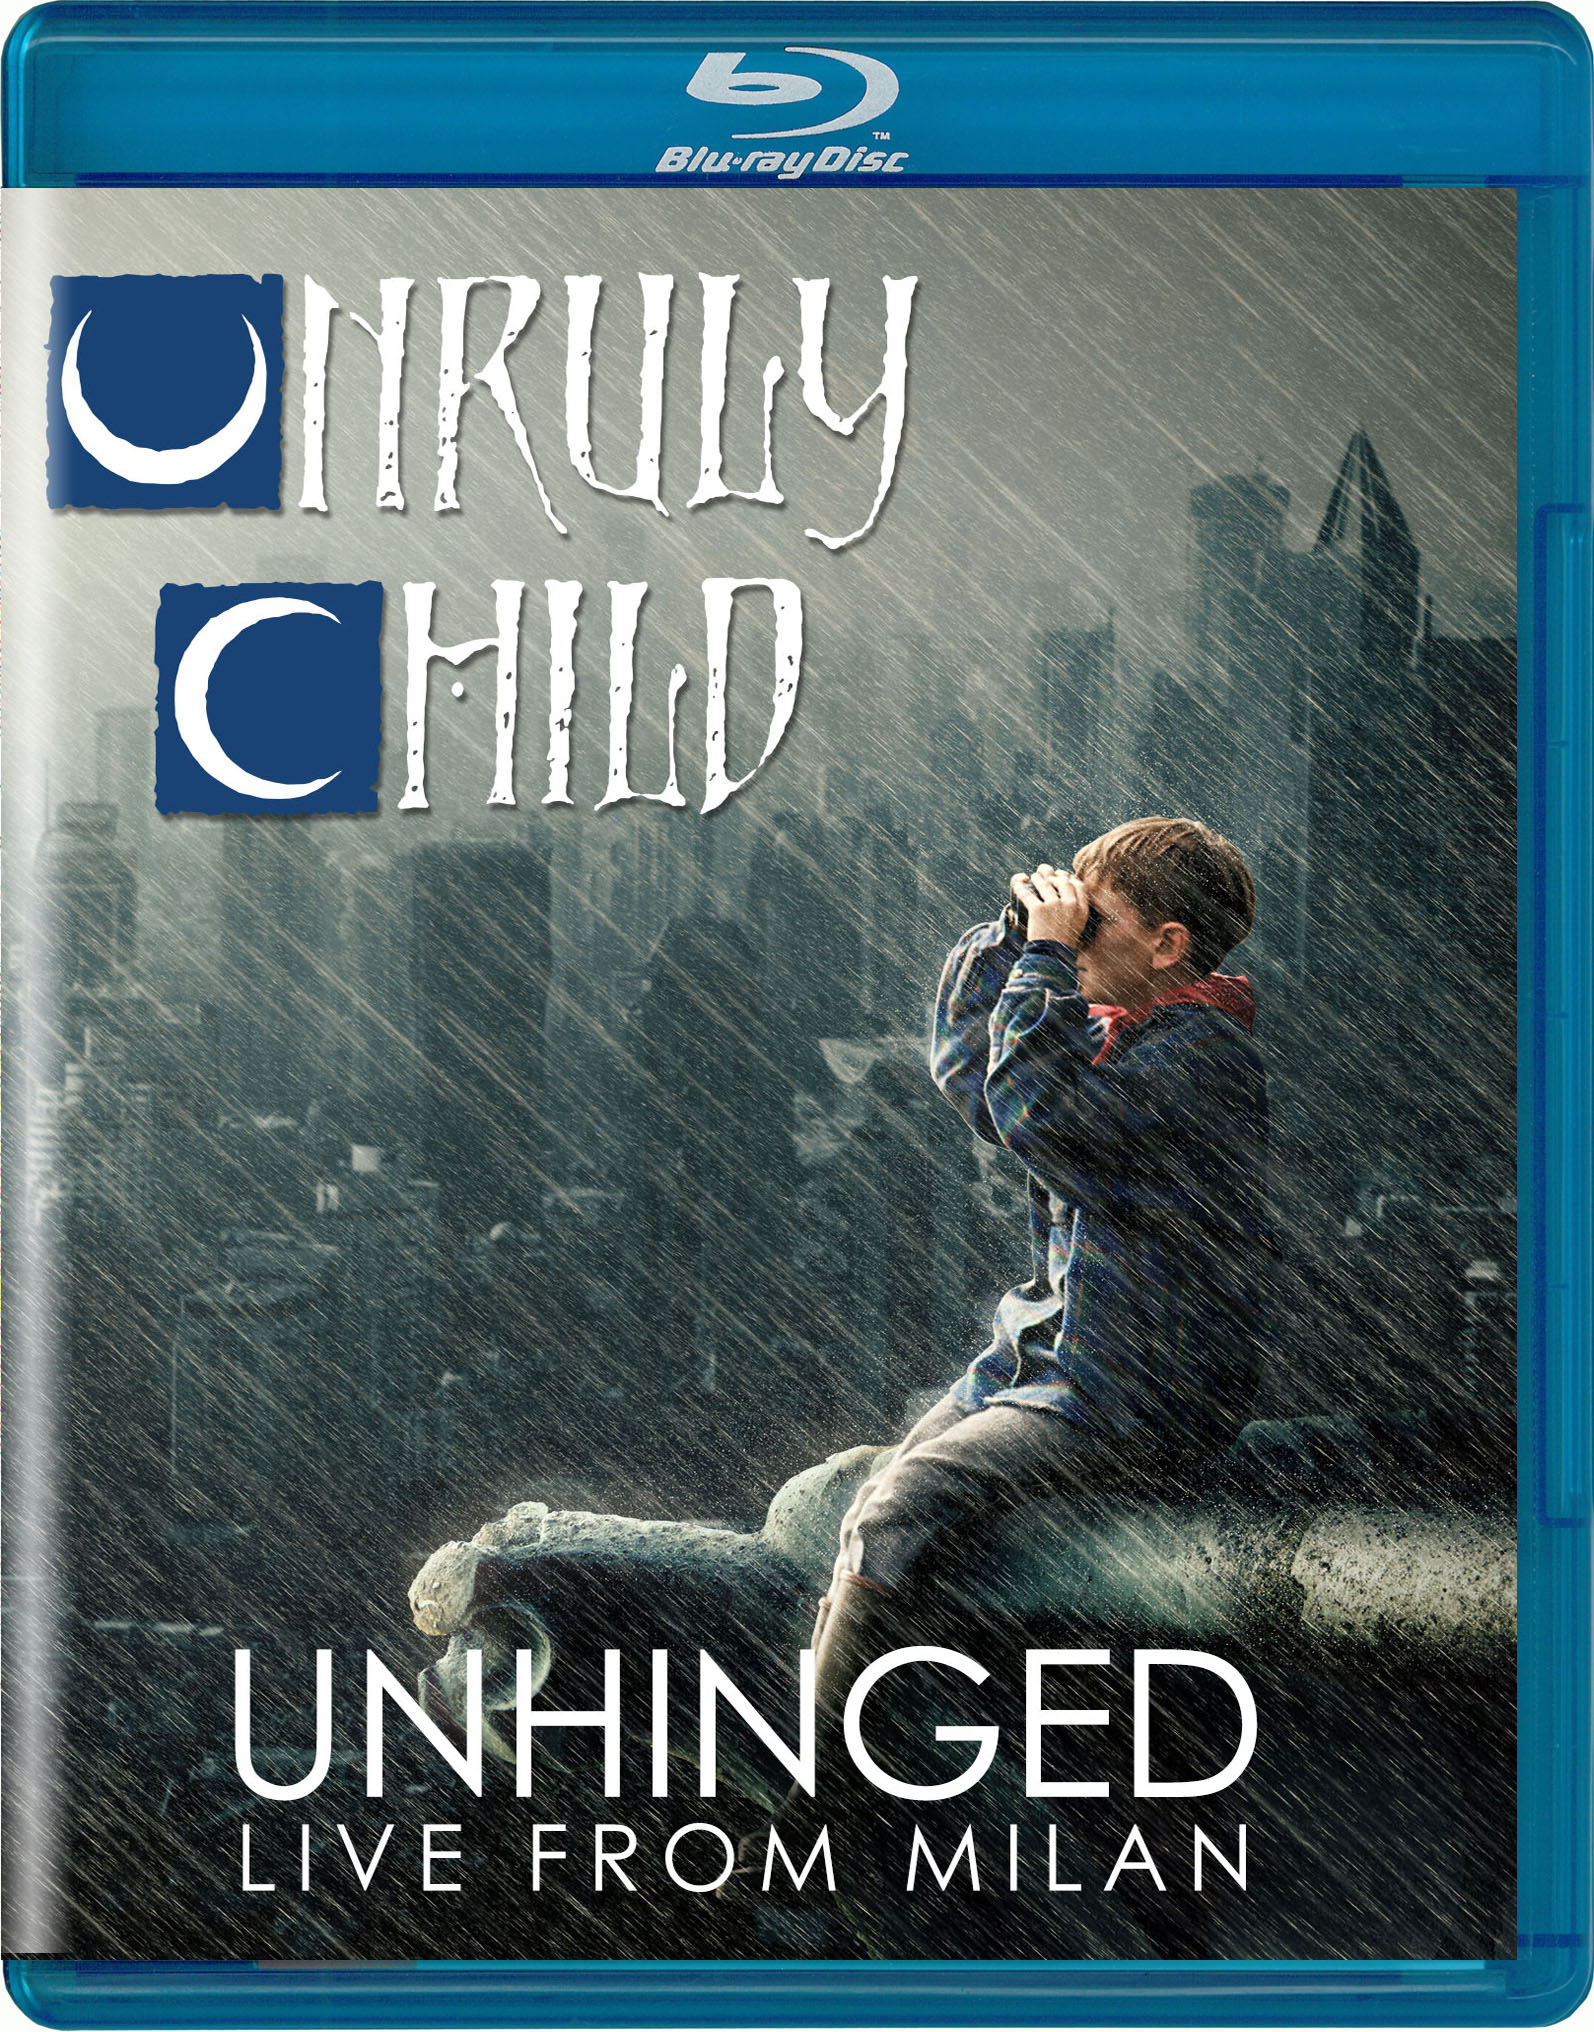 UNRULY CHILD - Unruly, Live and Unhinged